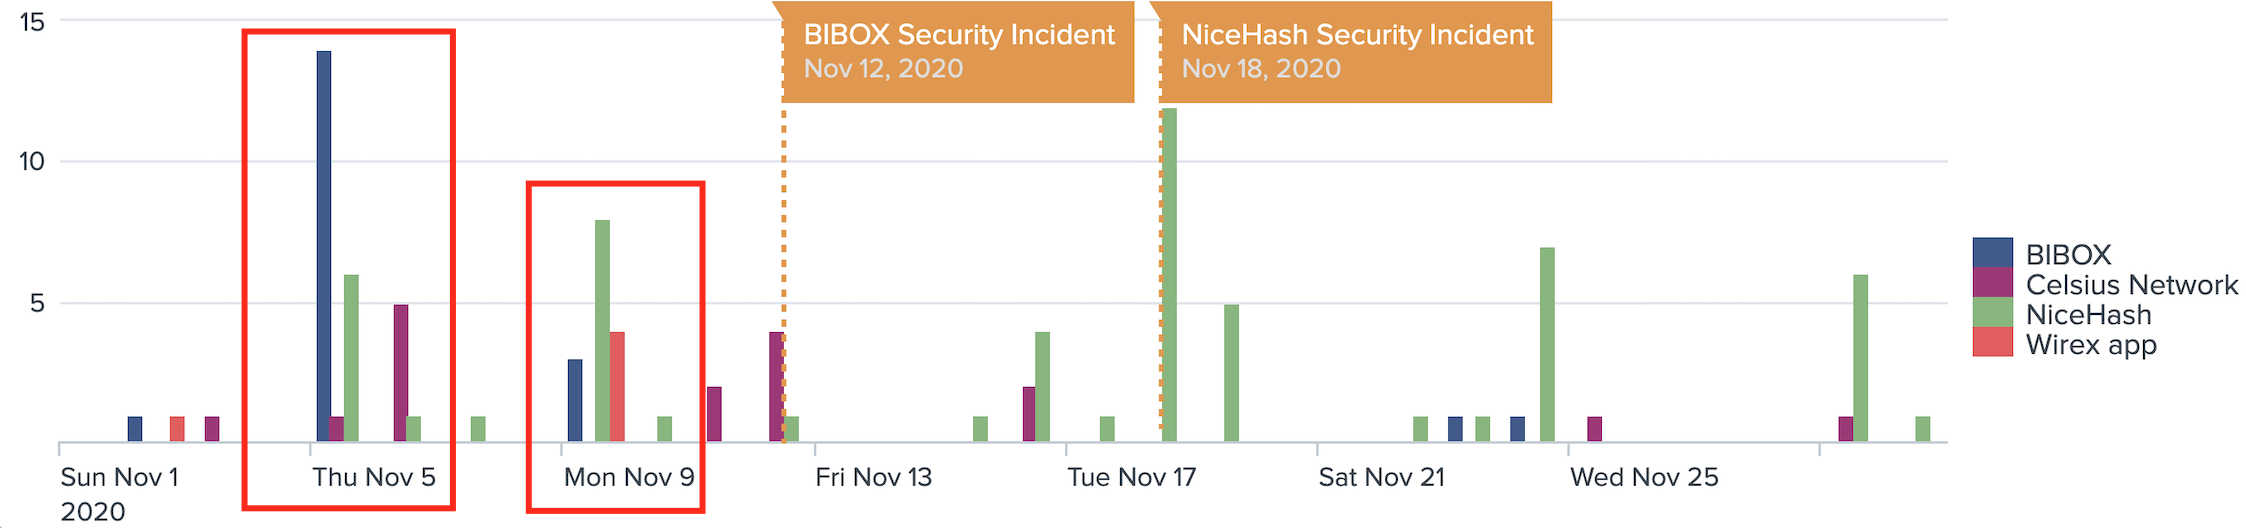 Security tag spikes for BIBOX and NiceHash. Source: <a href="https://inca.digital/products#data">Inca Digital</a>